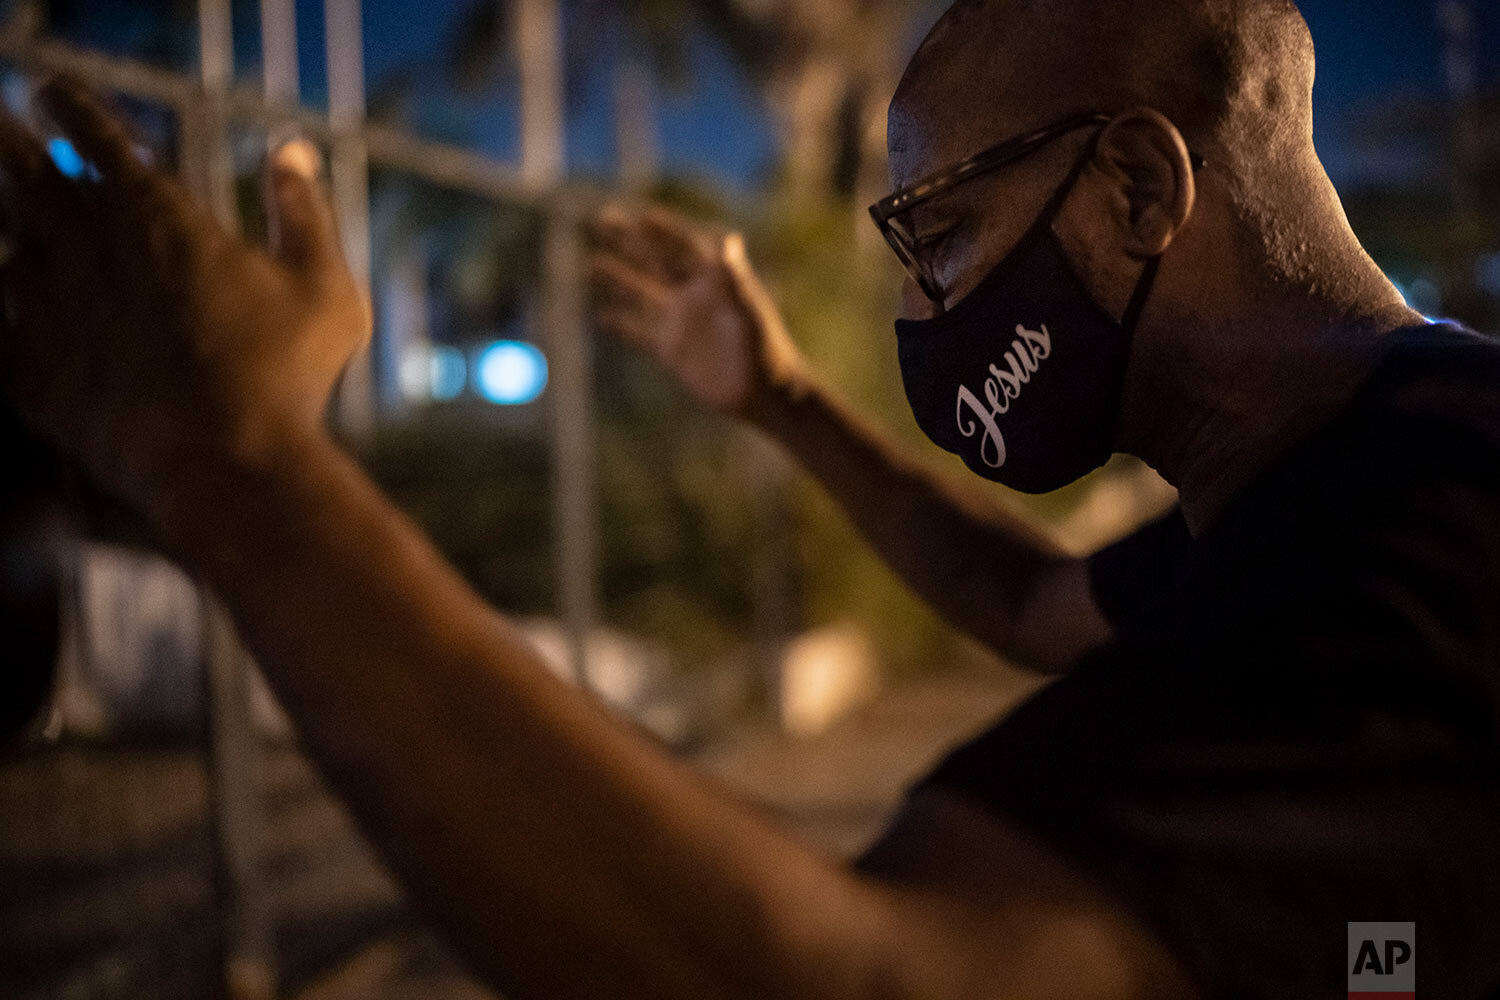  A member of the God's Love Evangelical Church and Rehab Center prays for COVID-19 patients outside a hospital in Rio de Janeiro, Brazil, Friday, March 26, 2021. (AP Photo/Felipe Dana) 